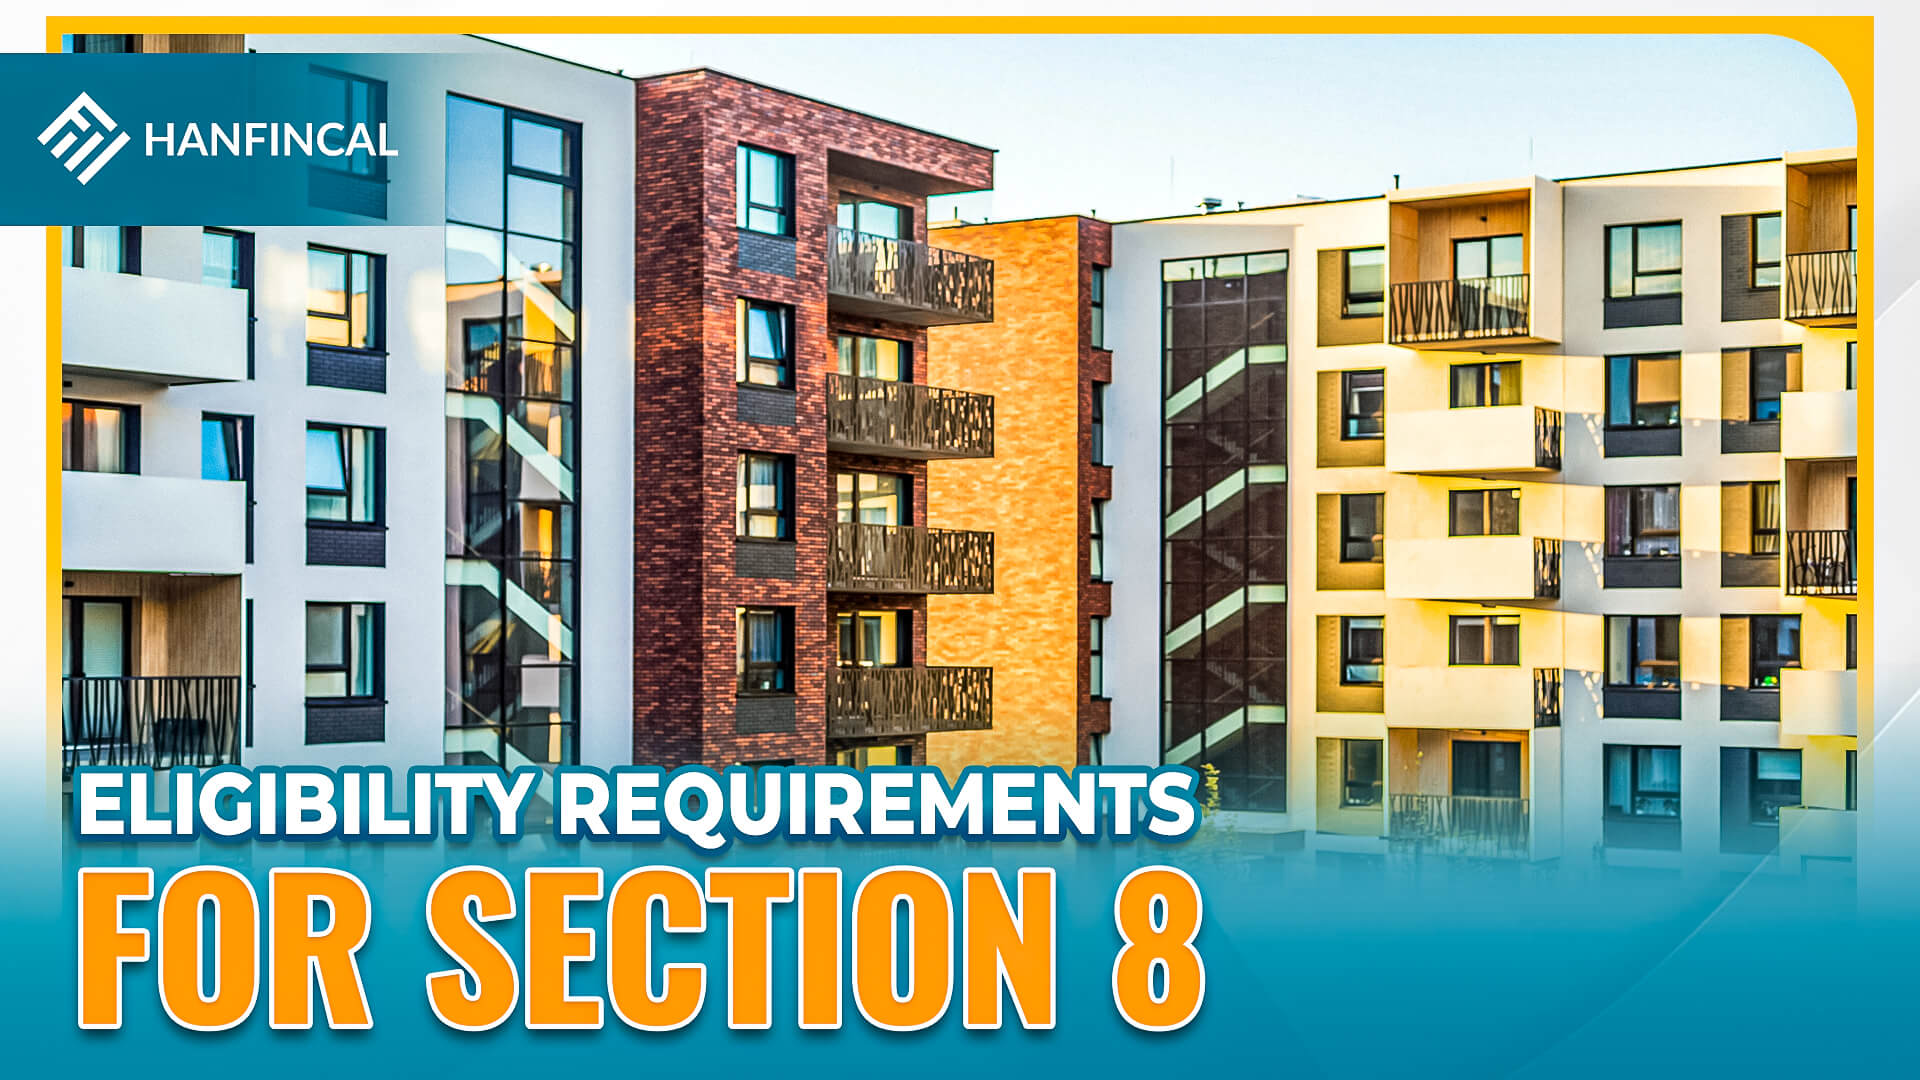 What Is Section 8 Housing